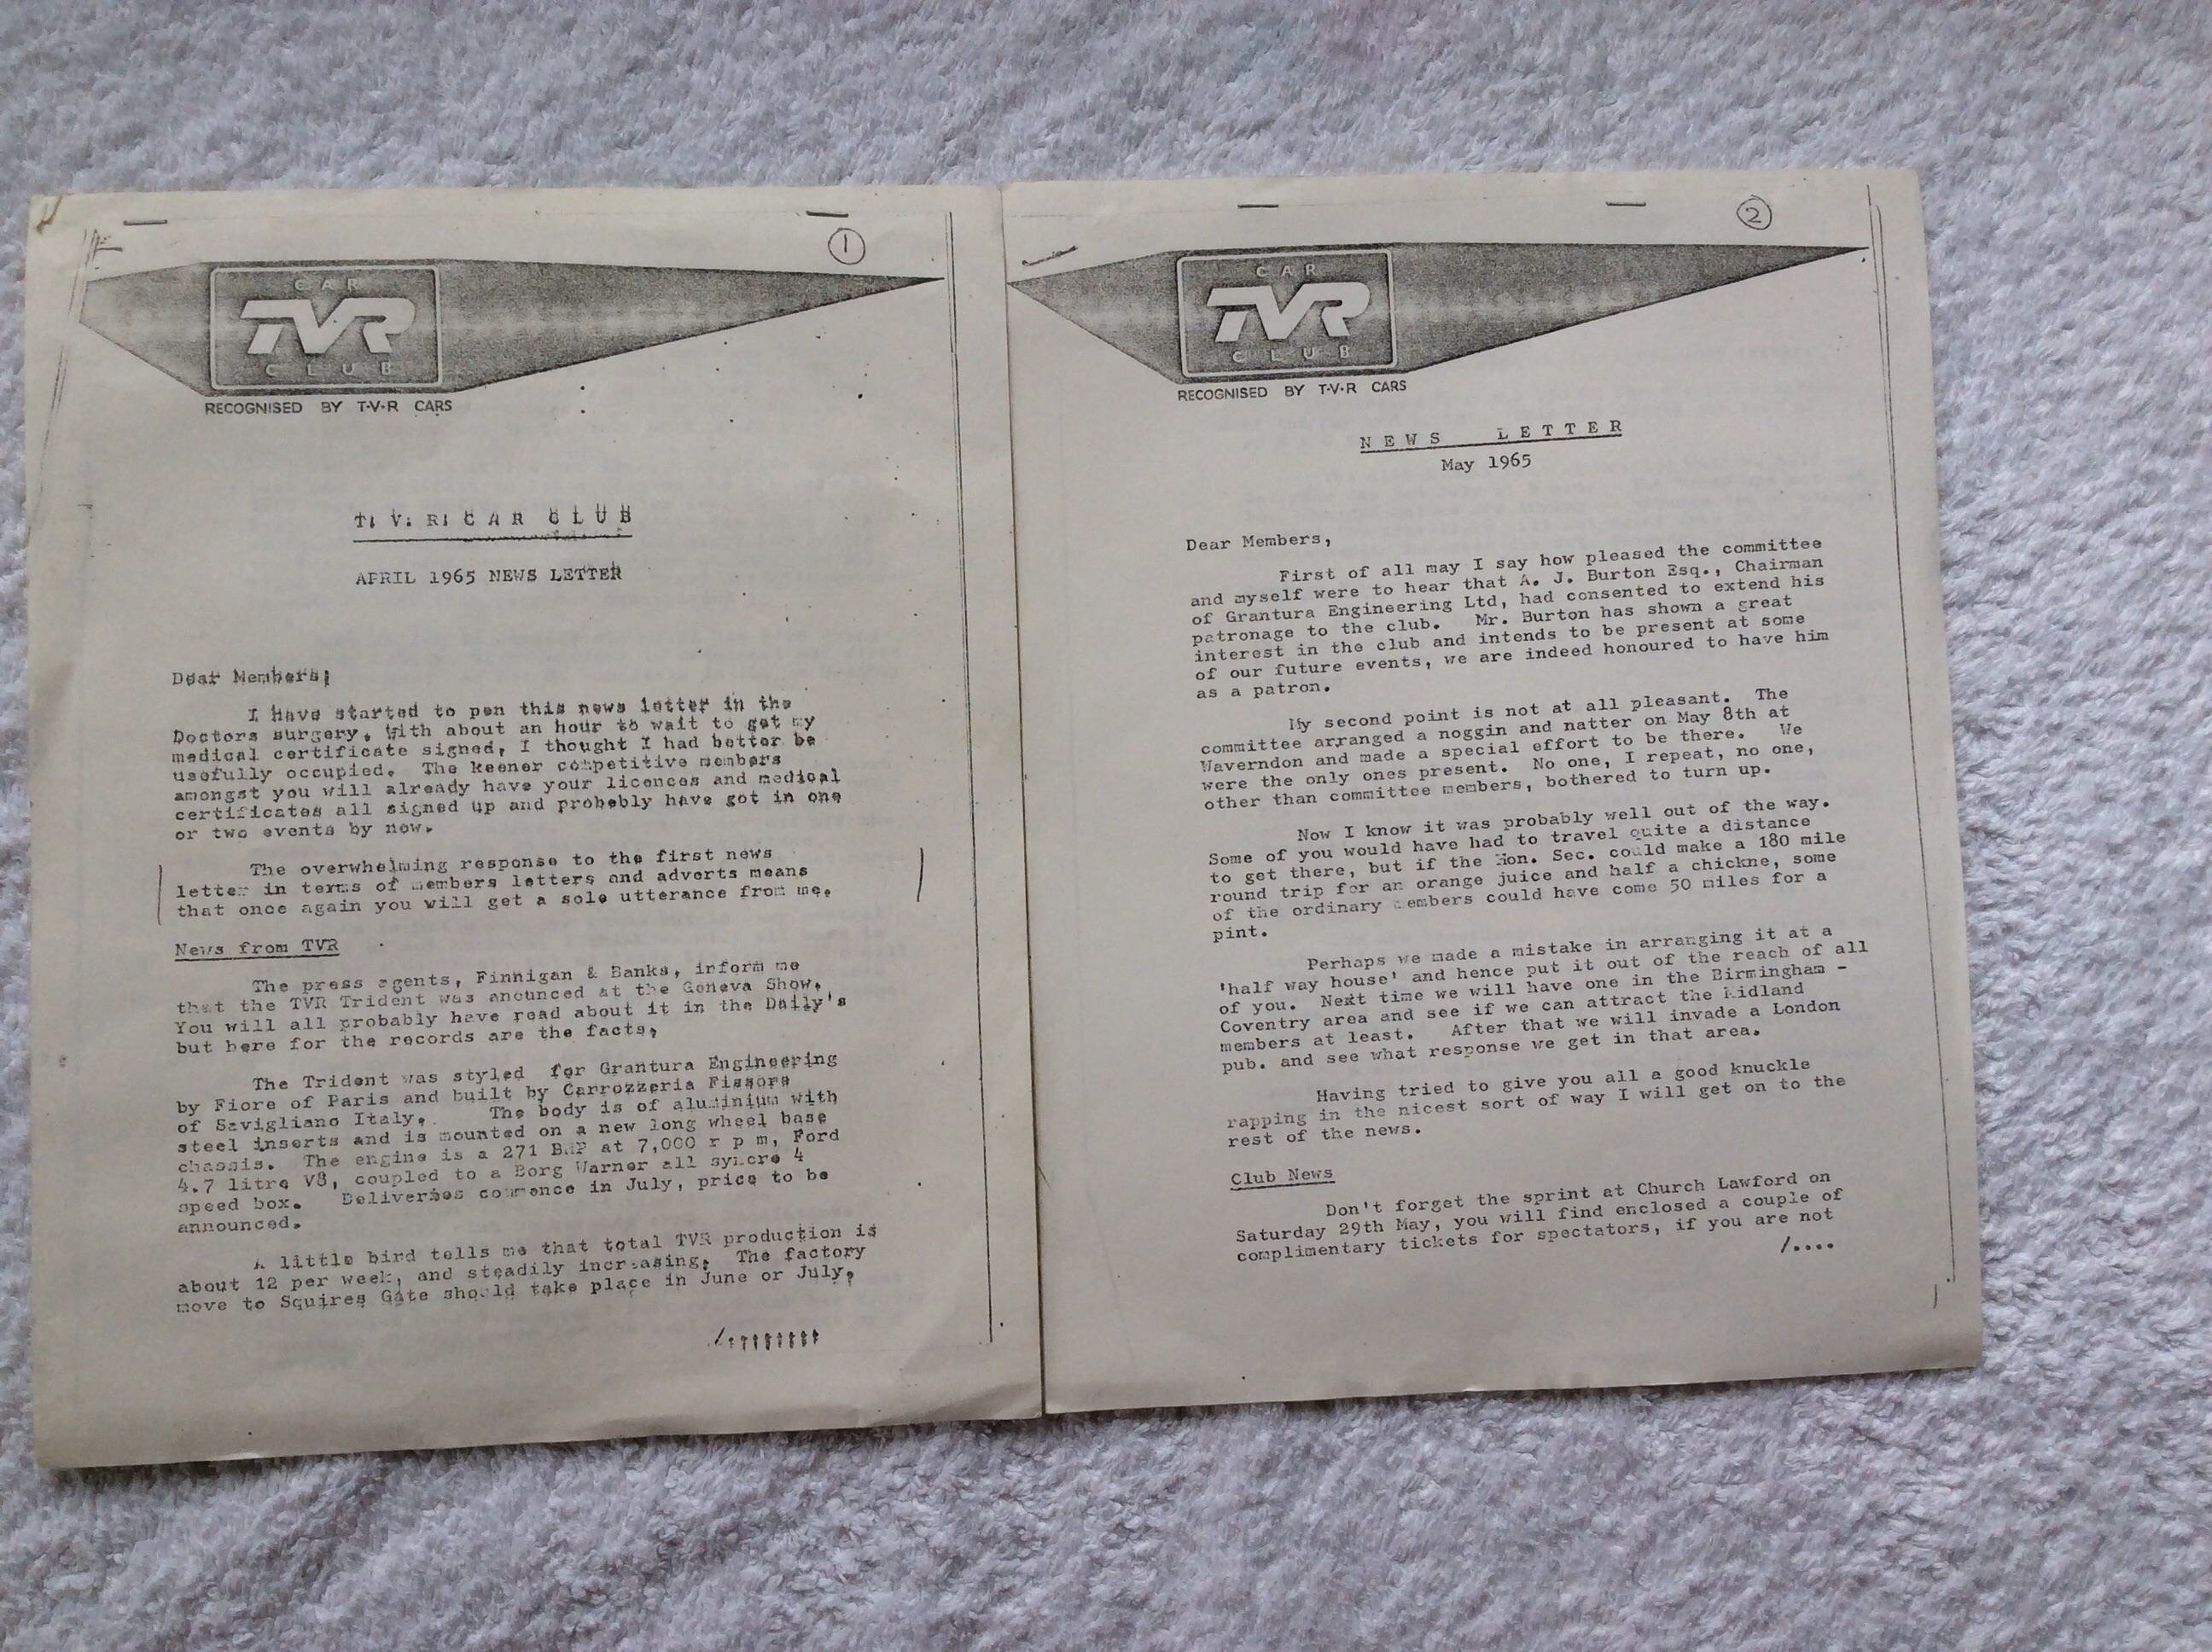 EARLY TVR ARTEFACTS and MEMORABILIA . - Page 1 - Classics - PistonHeads